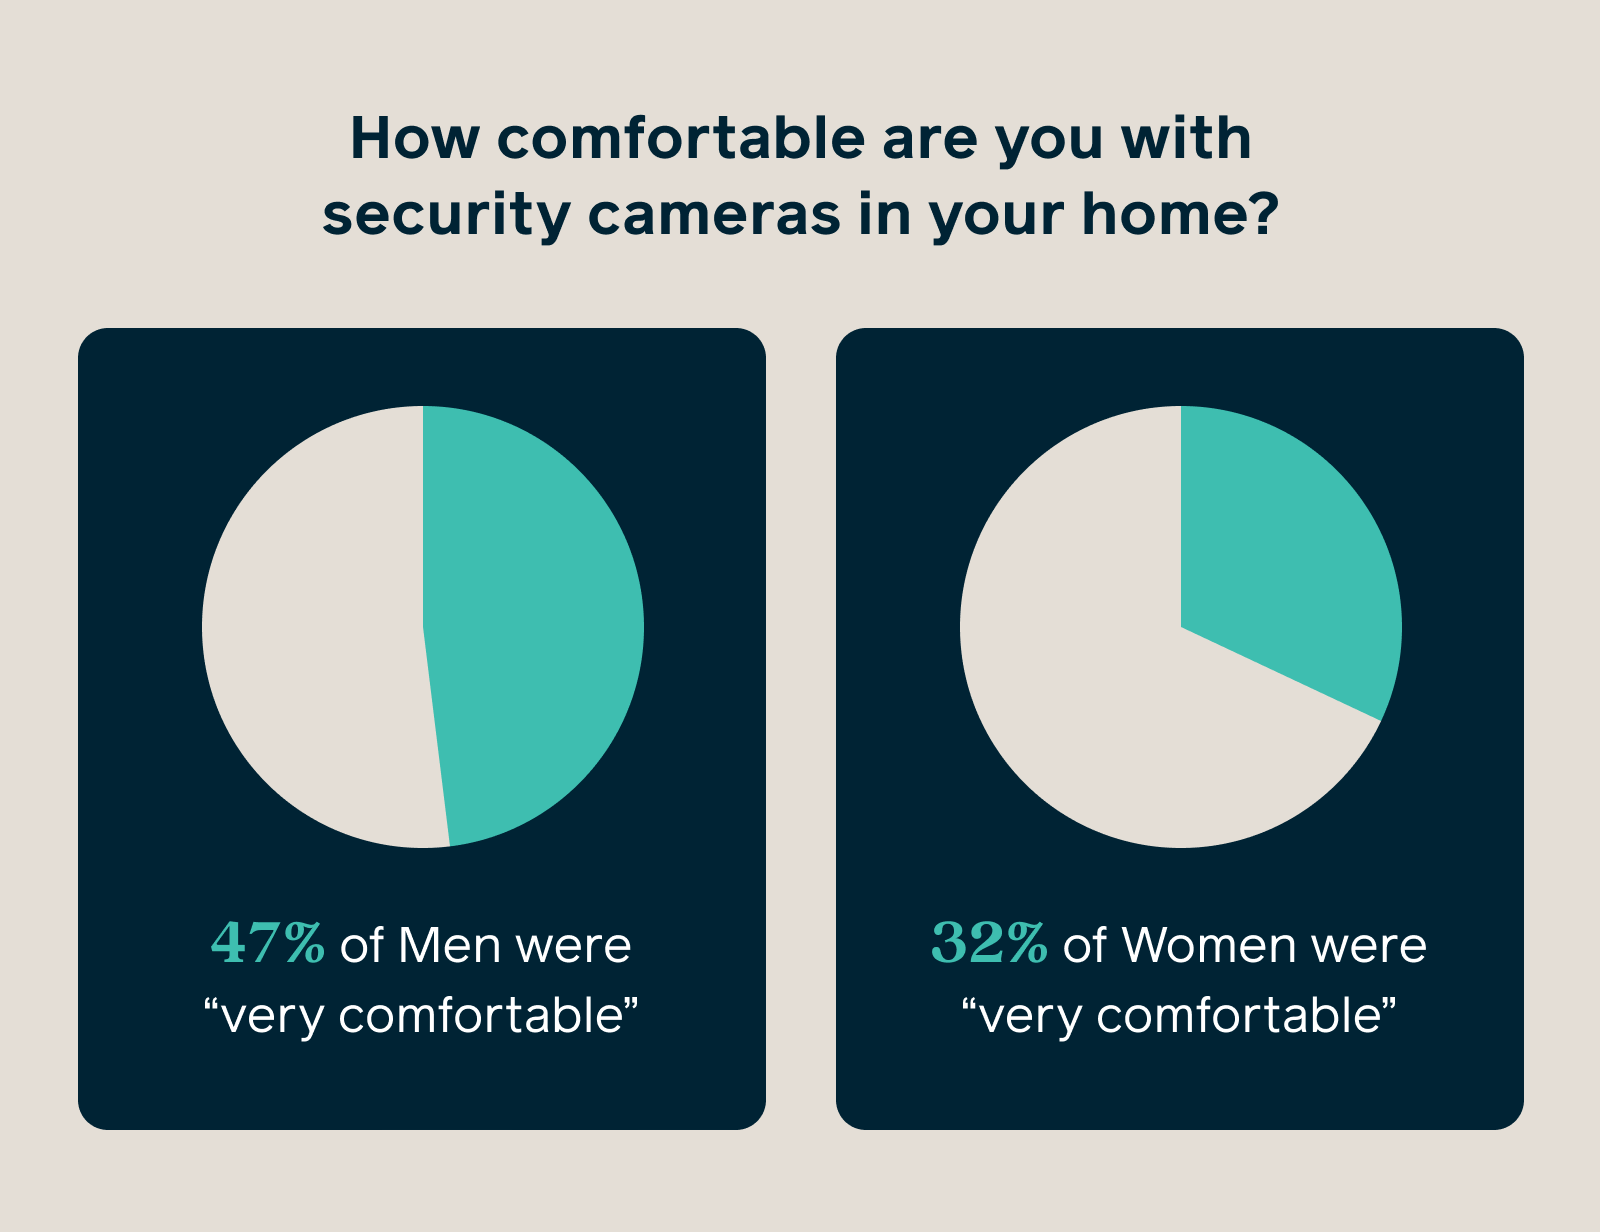 comfort level of home security cameras by men vs women